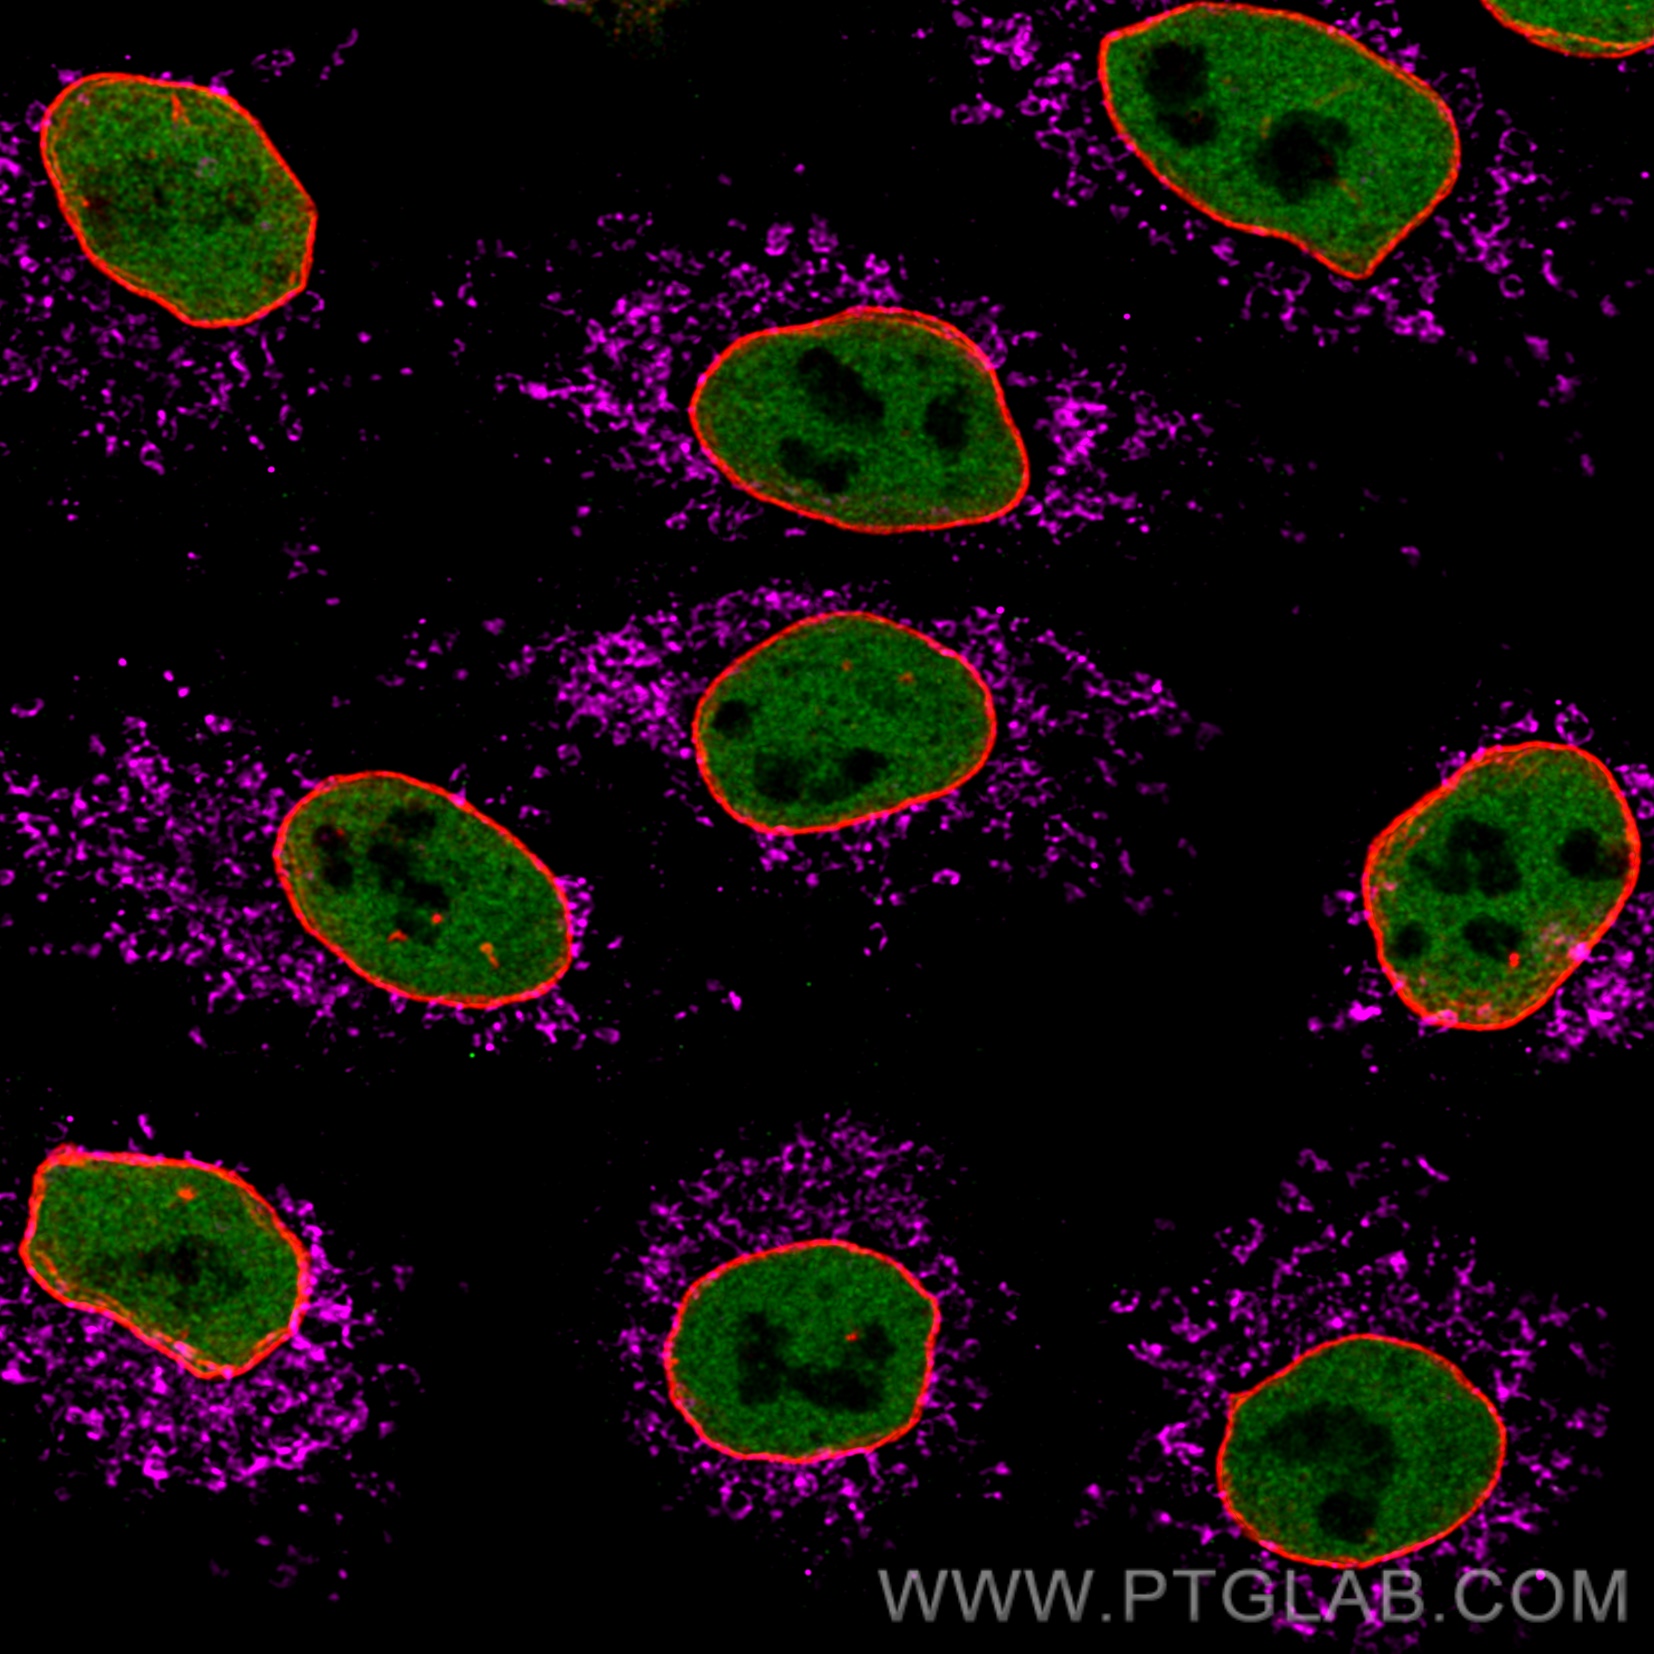 Immunofluorescence of HeLa: PFA-fixed HeLa cells were stained with anti-HDAC2 (67165-1-Ig) labeled with FlexAble CoraLite® Plus 488 Kit (KFA061, green), mouse IgG2b anti-Lamin primary and anti-mouse IgG secondary antibody Alexa Fluor® 568 (red) and anti-Tom20 (66777-1-Ig) labeled with FlexAble ​CoraLite® Plus 647 Kit (KFA063, magenta). Confocal images were acquired with a 100x oil objective and post-processed. Images were recorded at the Core Facility Bioimaging at the Biomedical Center, LMU Munich.